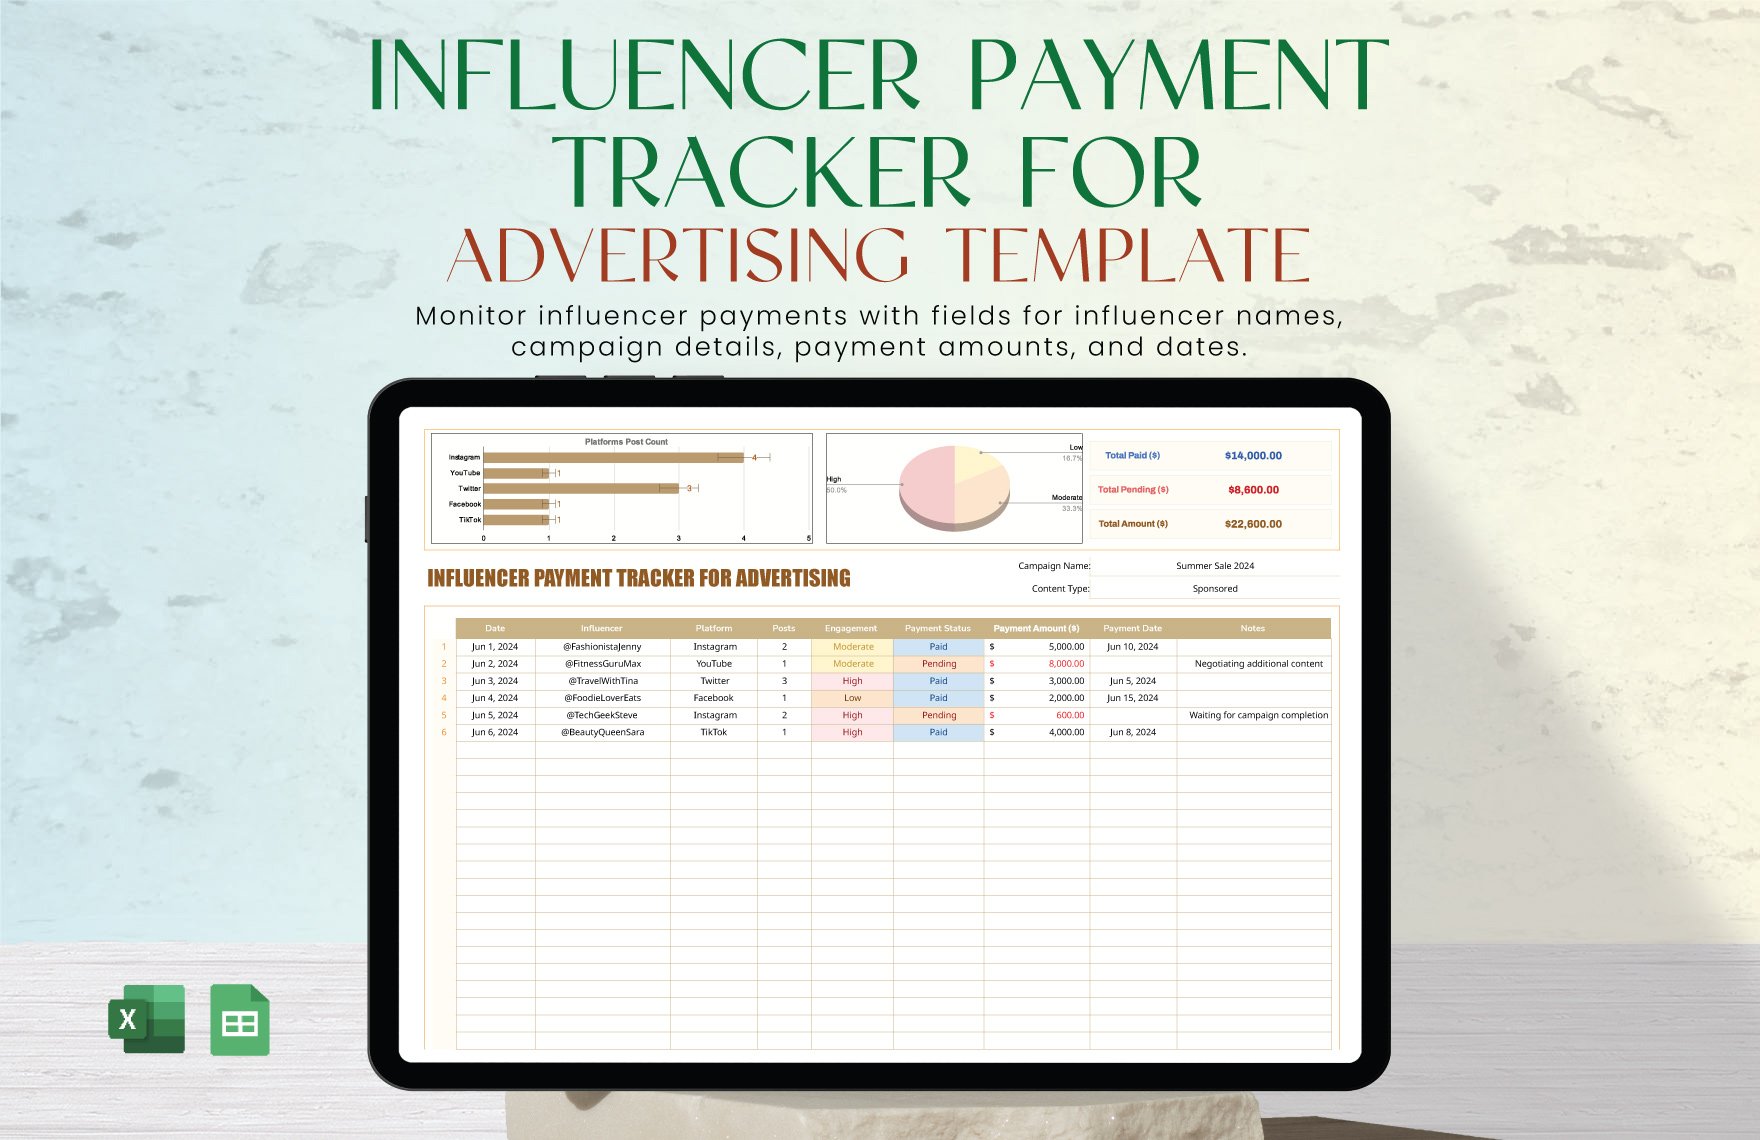 Influencer Payment Tracker for Advertising Template in Excel, Google Sheets